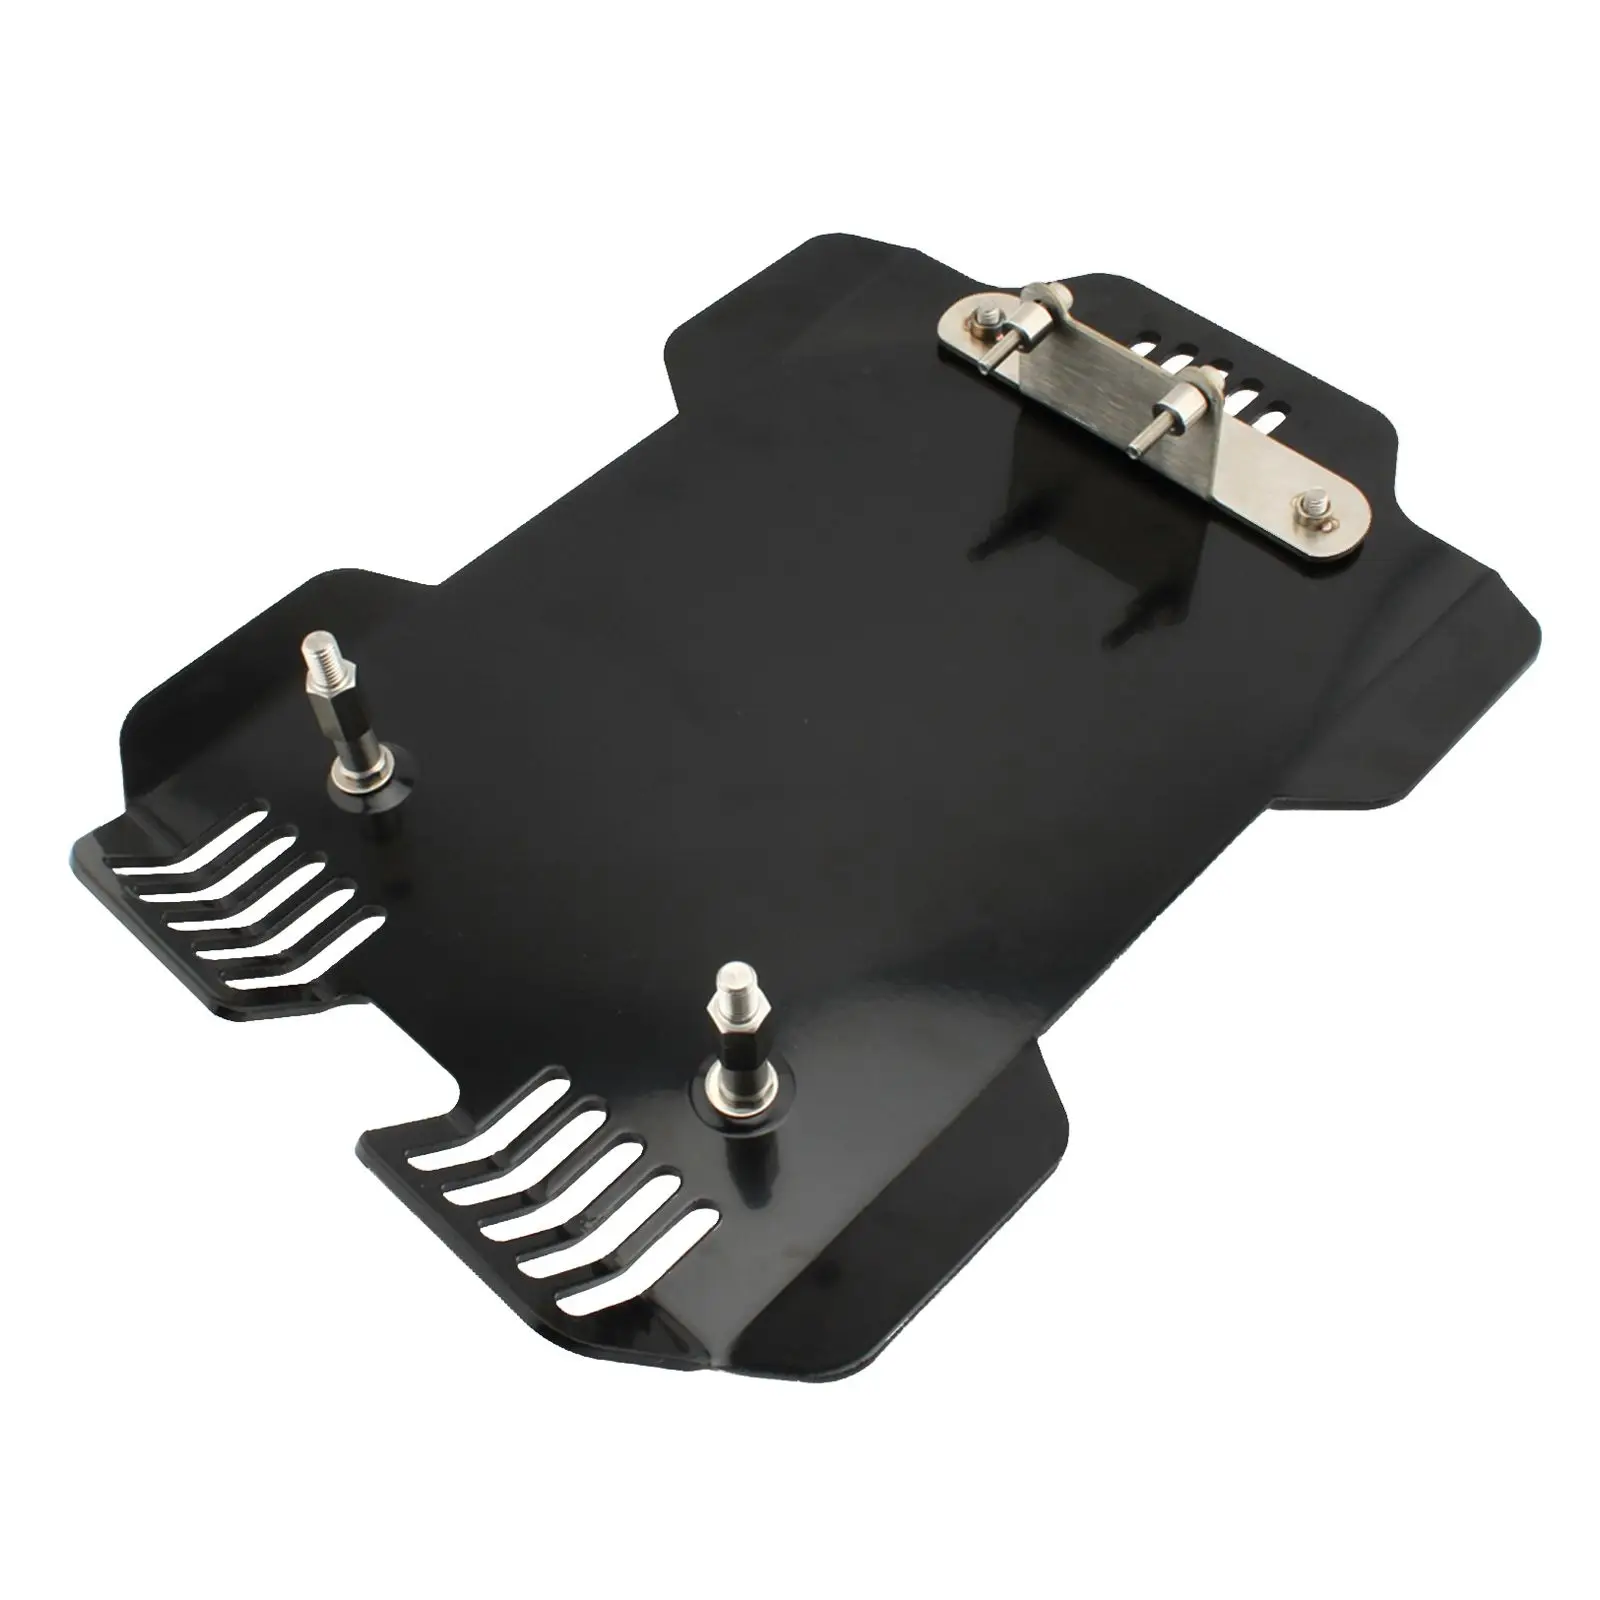 Skid Plate Protection Cover Protective Aluminum Engine Chassis Fits for  R18